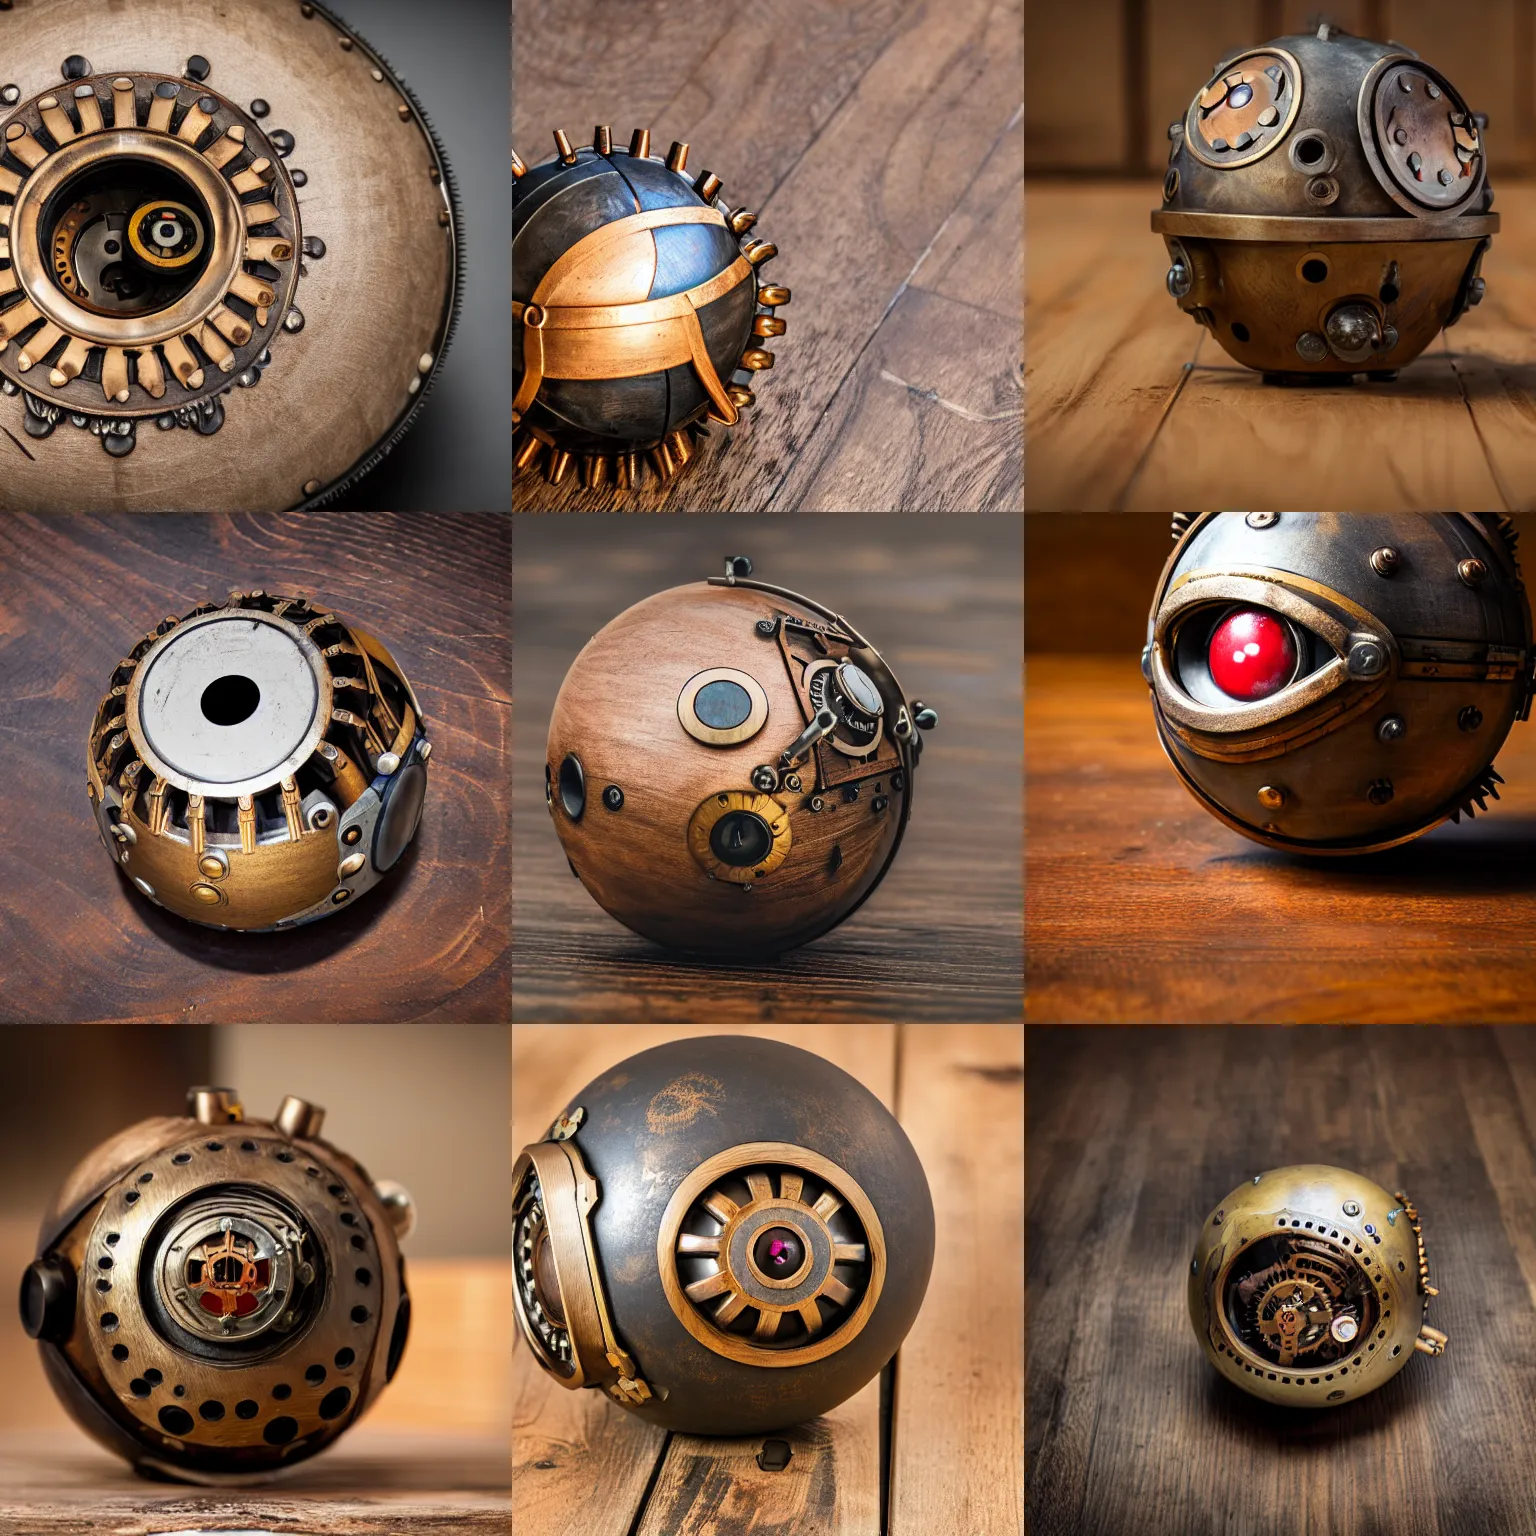 Prompt: a studio photograph of a steampunk pokeball with bronze gears and small wooden inlays laying on wood grain, xf iq 4, 1 5 0 mp, 5 0 mm, f 1. 4, iso 2 0 0, 1 / 1 6 0 s, natural light, adobe lightroom, photolab, affinity photo, photodirector 3 6 5